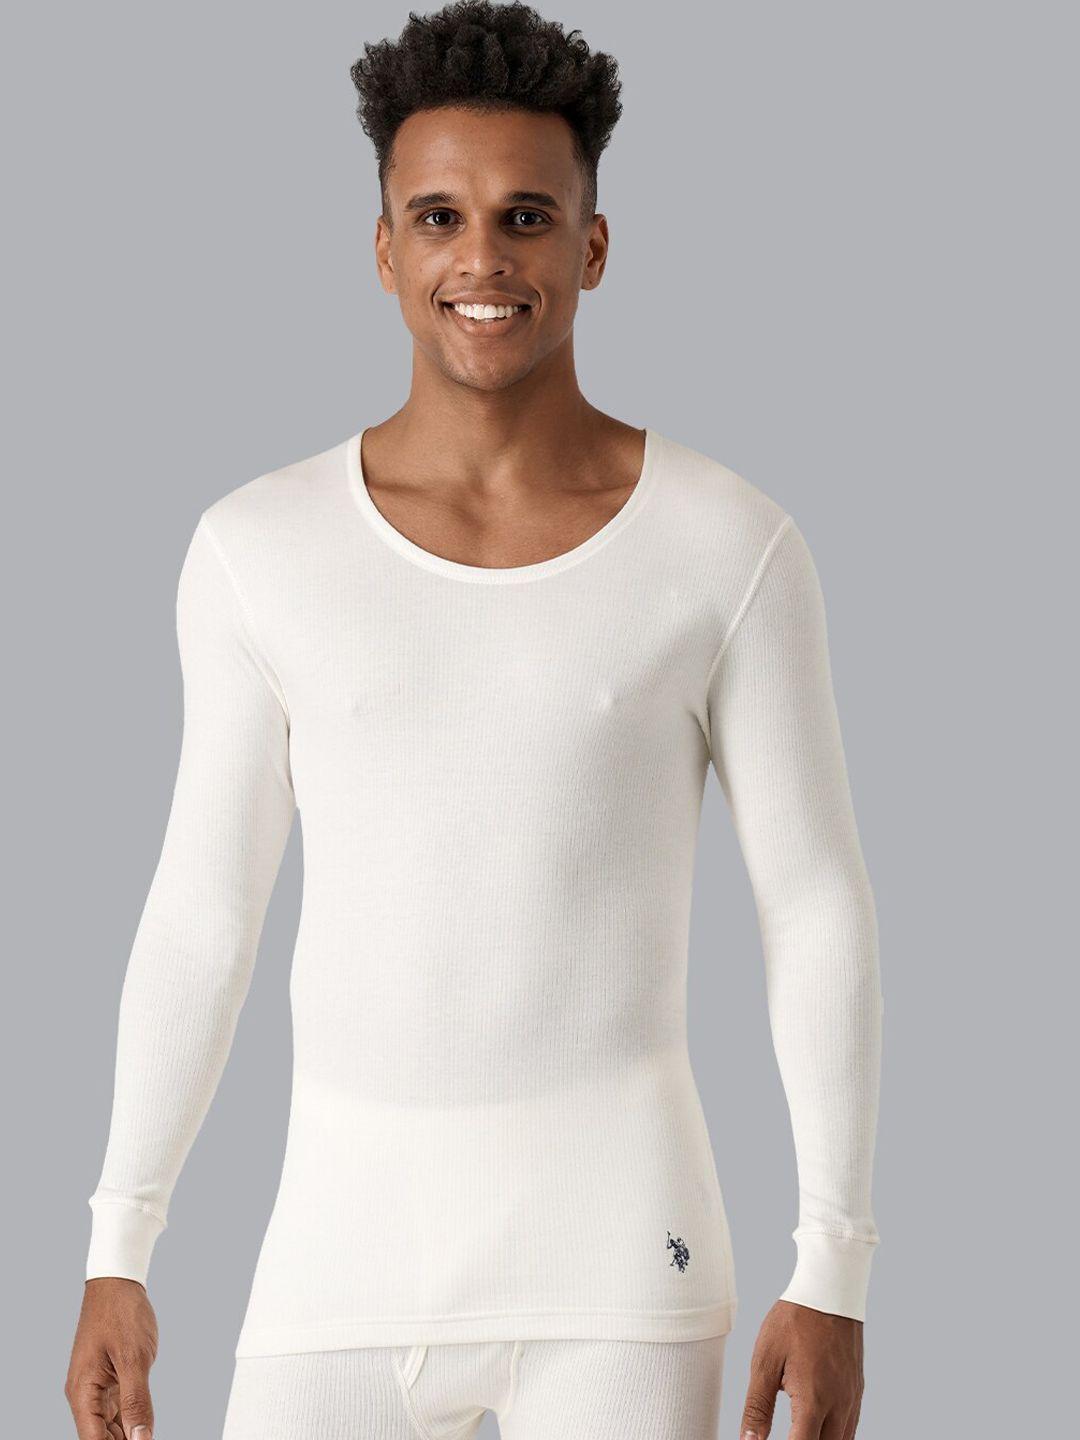 u.s. polo assn. men white solid cotton thermal top